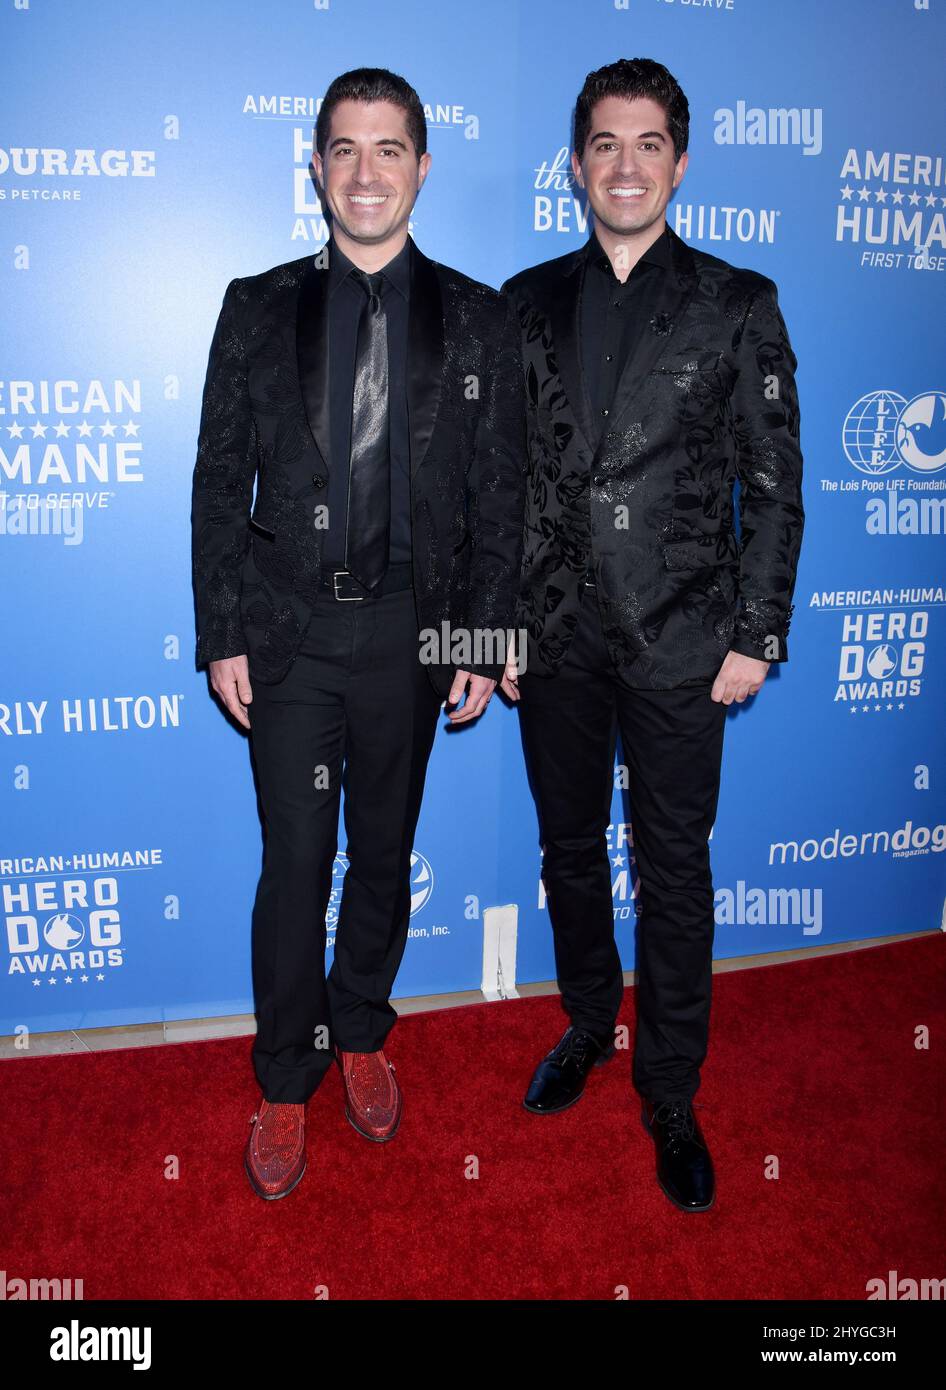 Will Nunziata and Anthony Nunziata at the 2018 American Humane Hero Dog Awards held at the Beverly Hilton Hotel on September 29, 2018 in Beverly Hills, USA. Stock Photo